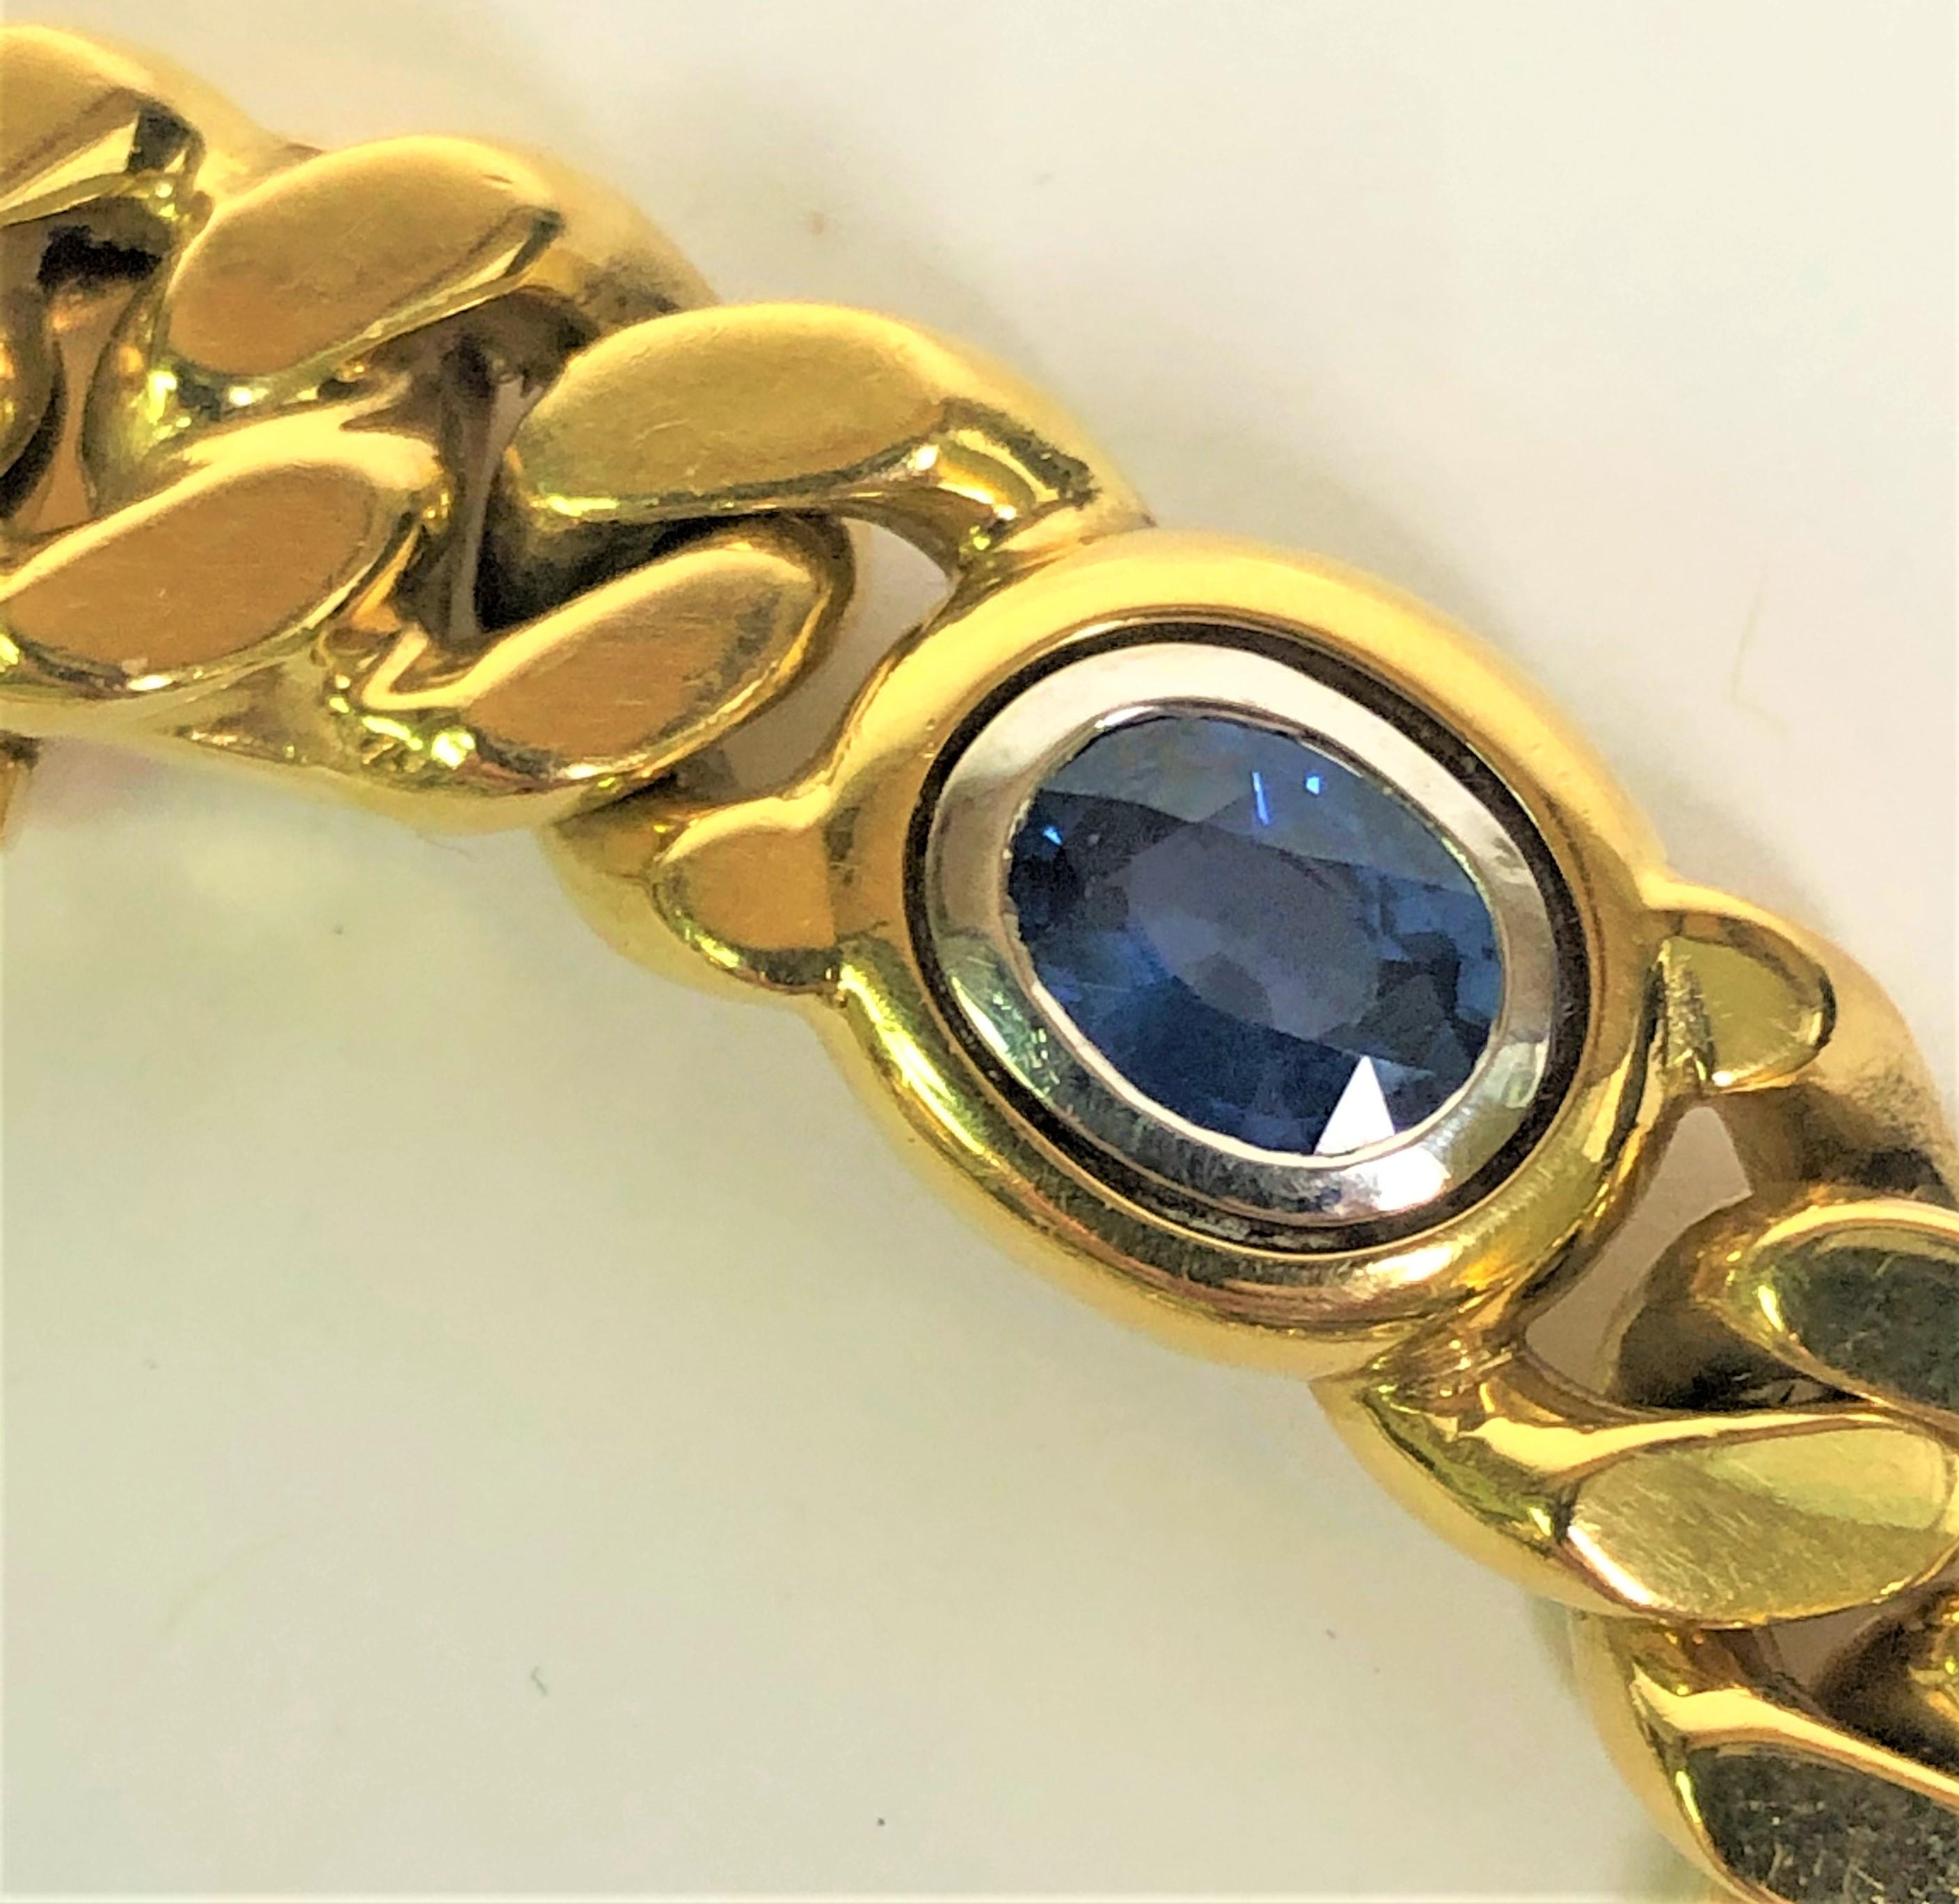 By designer Louis Fiessler, this bracelet is a classic.
18 karat yellow polished curb chain with five oval bezel set stones.
Two rubies, two sapphires and one emerald, each approximately 6mm x 5mm.
Approximately 7.75 inches long and approximately